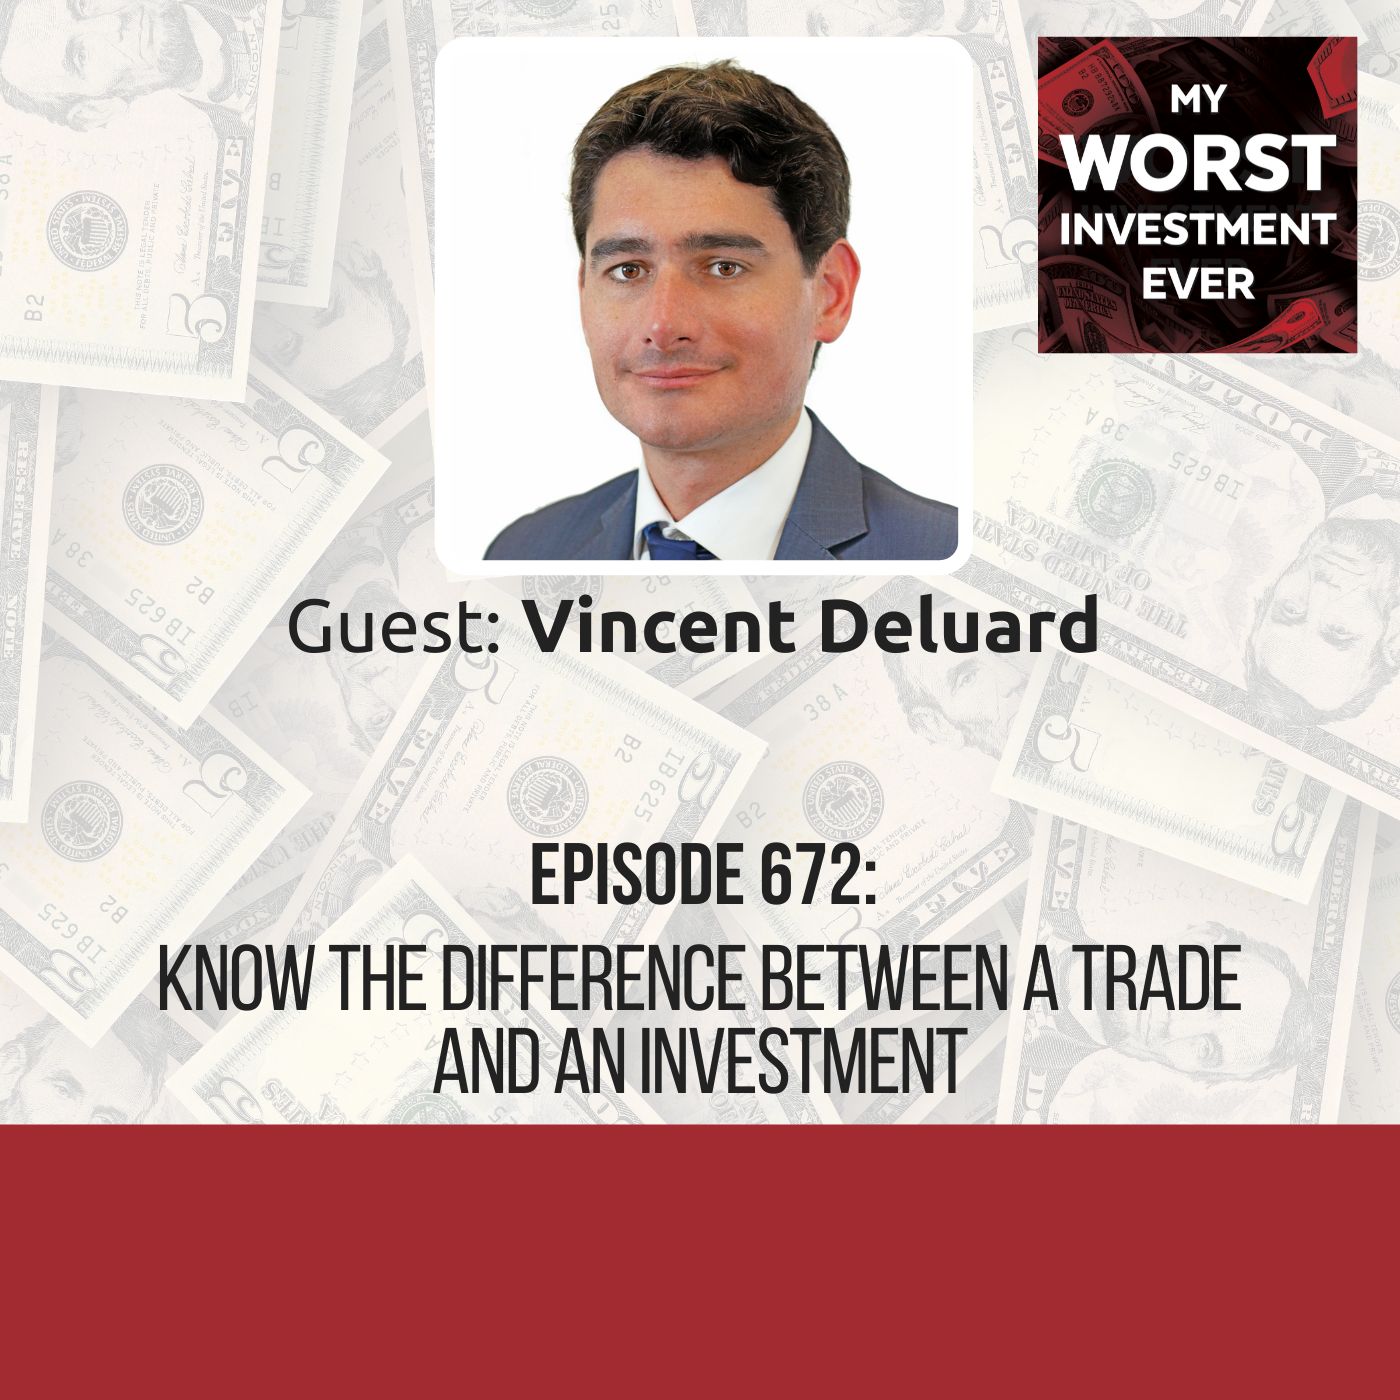 Vincent Deluard – Know the Difference Between a Trade and an Investment